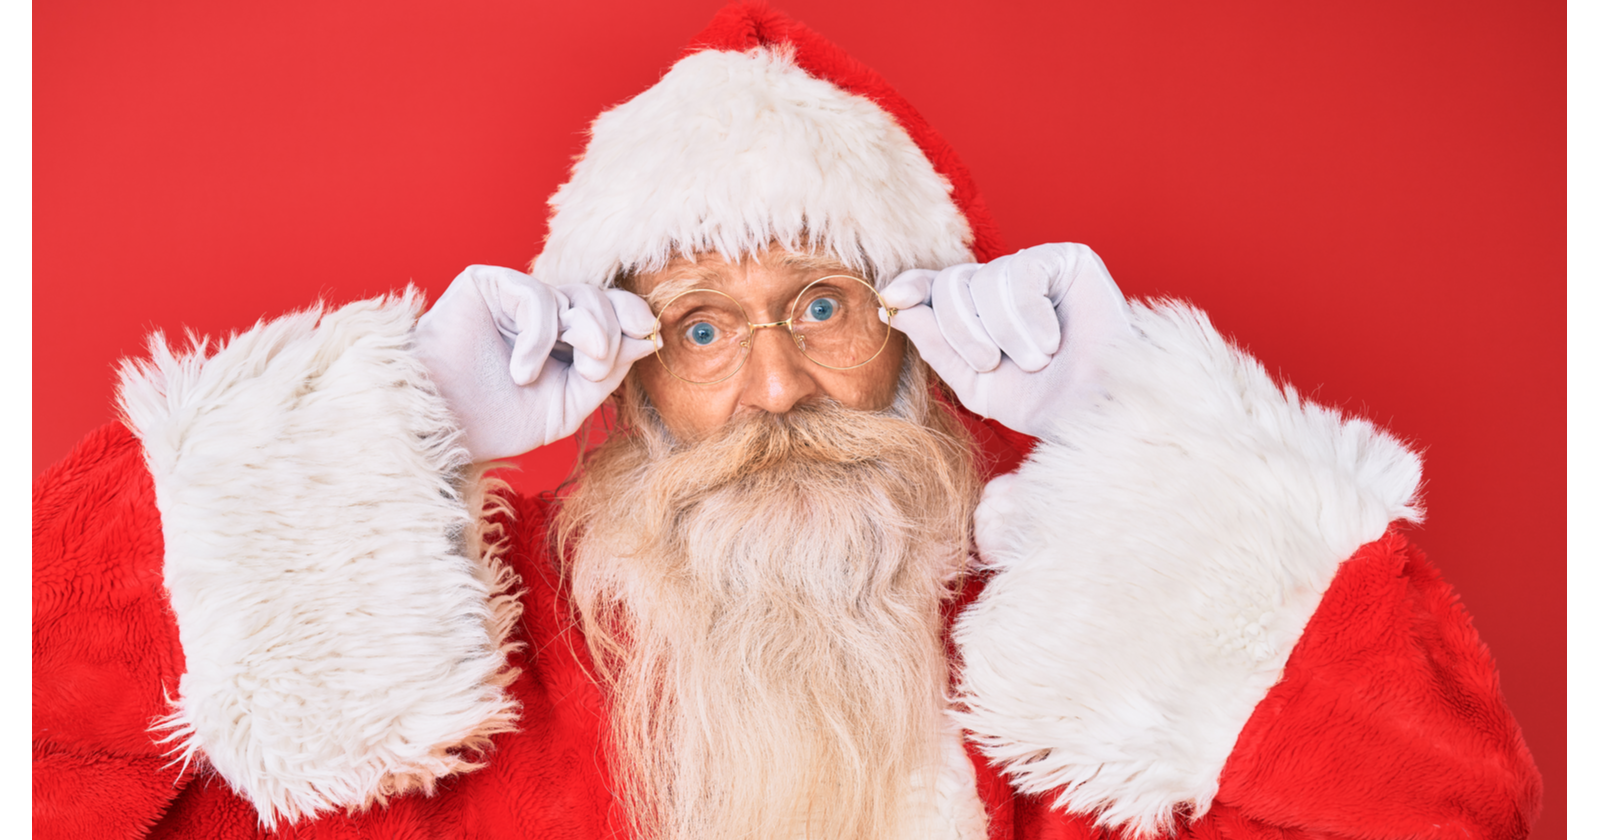 Is Google Trying To Erase Santa? The Curious Case Of EmailSanta.com via @sejournal, @tonynwright